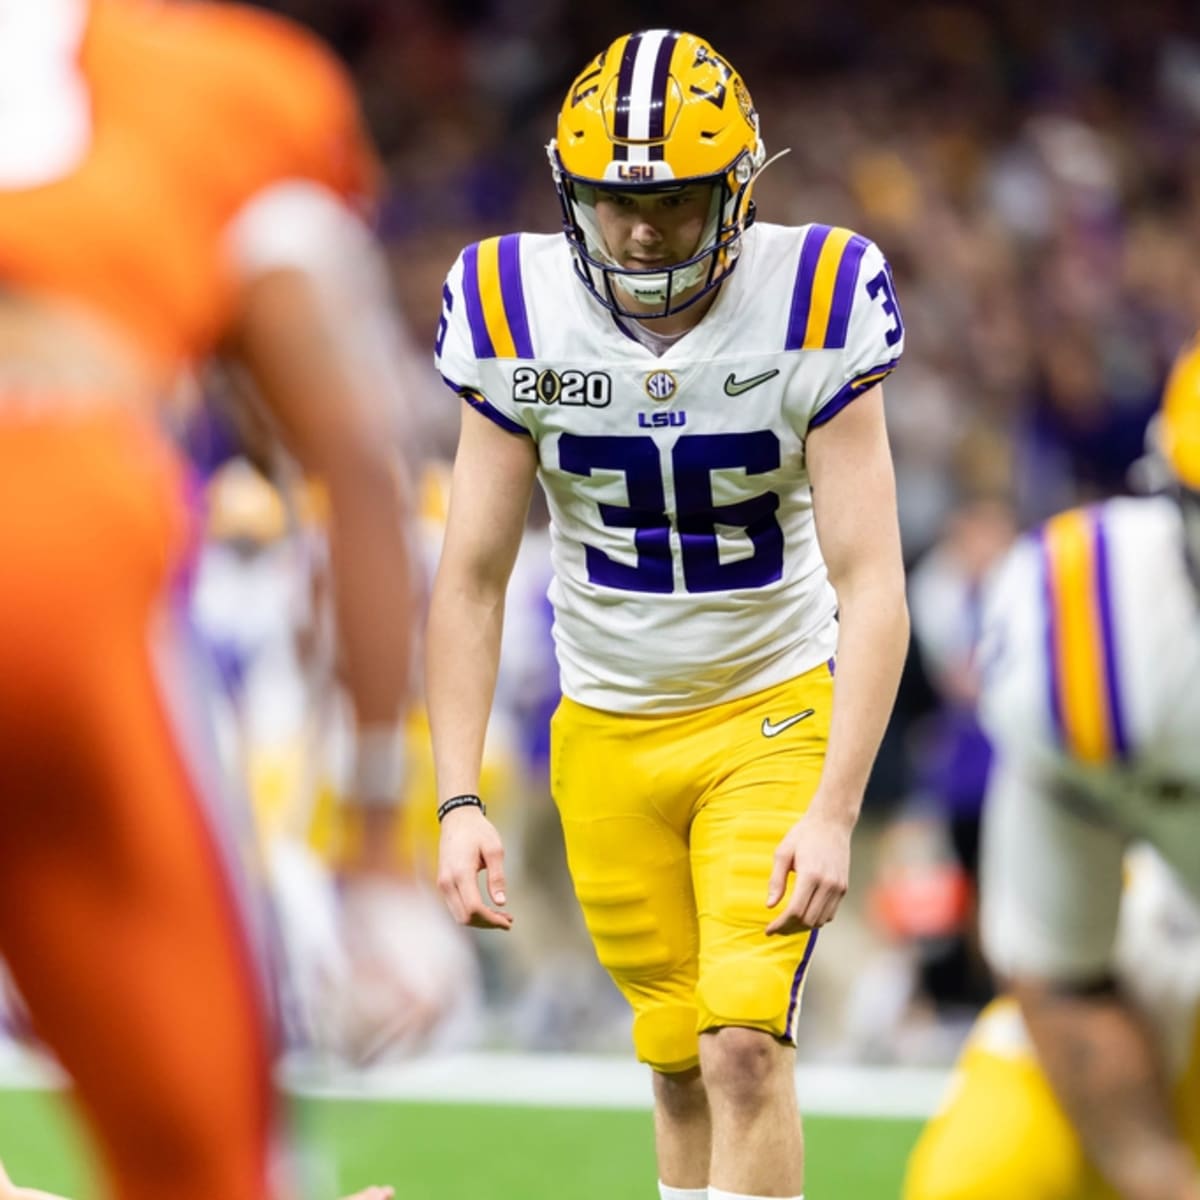 Can Cade York Be The Kicker The Cleveland Browns Need Him To Be?